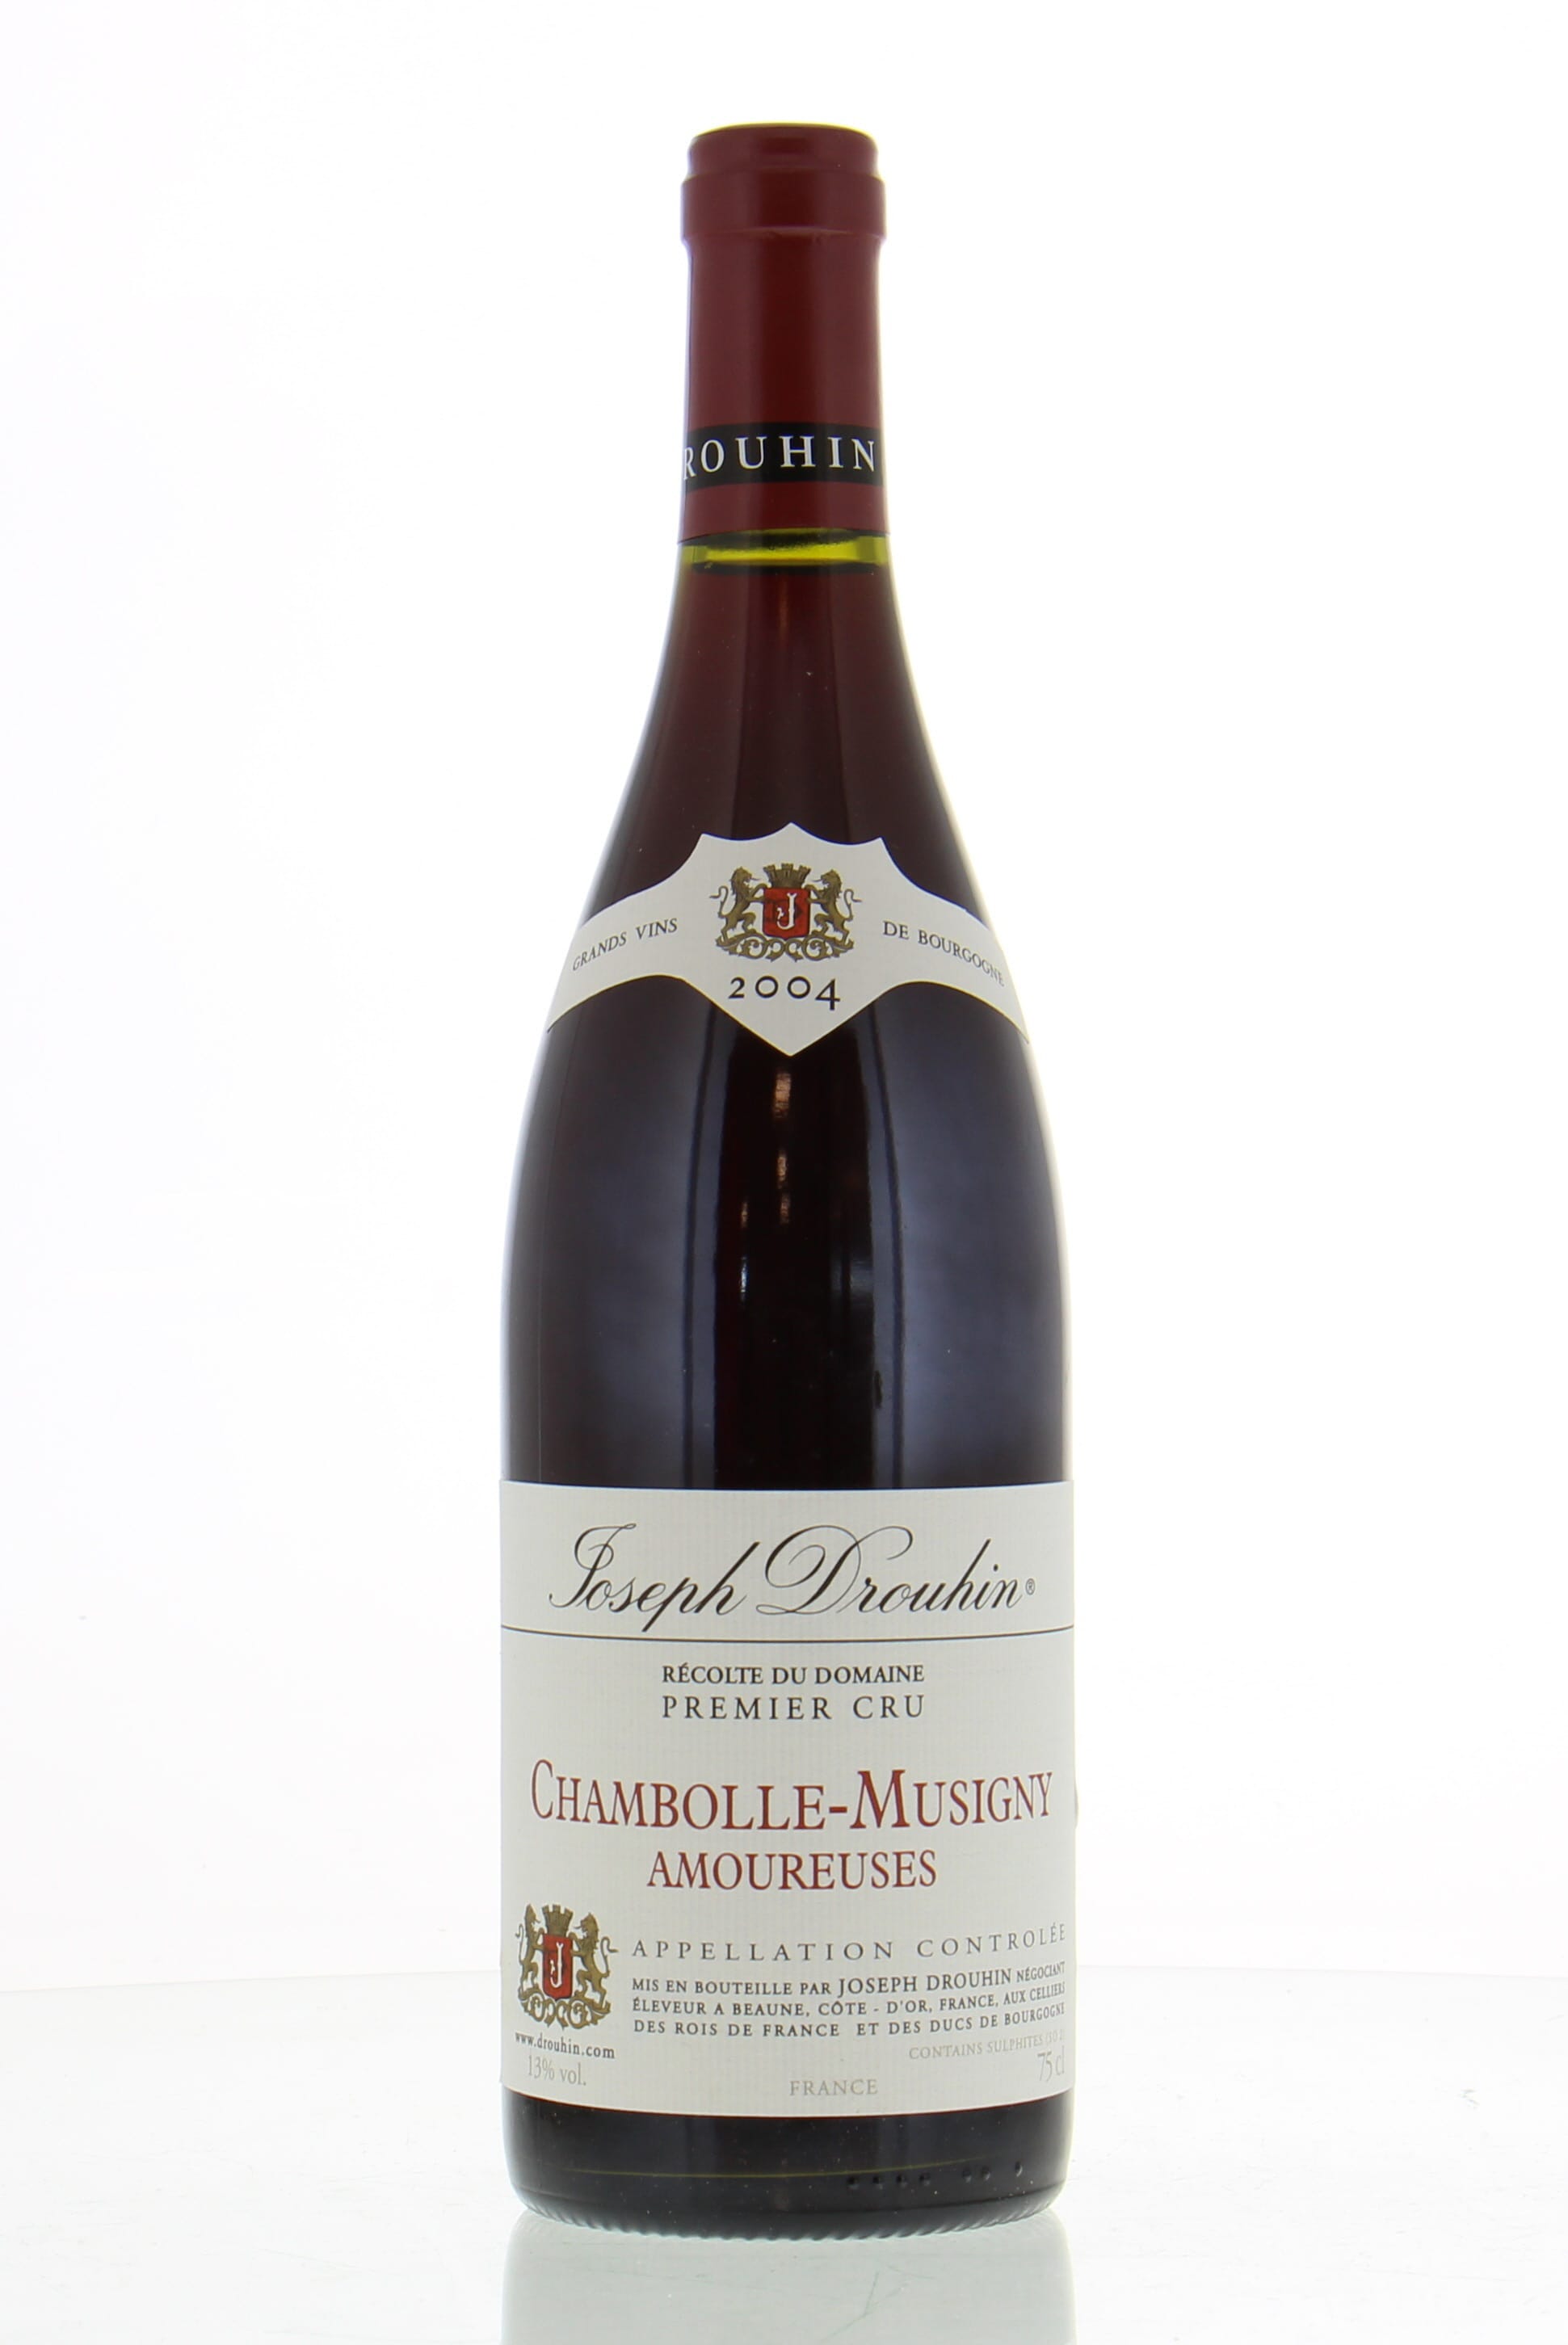 Drouhin, Joseph - Chambolle Musigny Les Amoureuses 2004 perfect